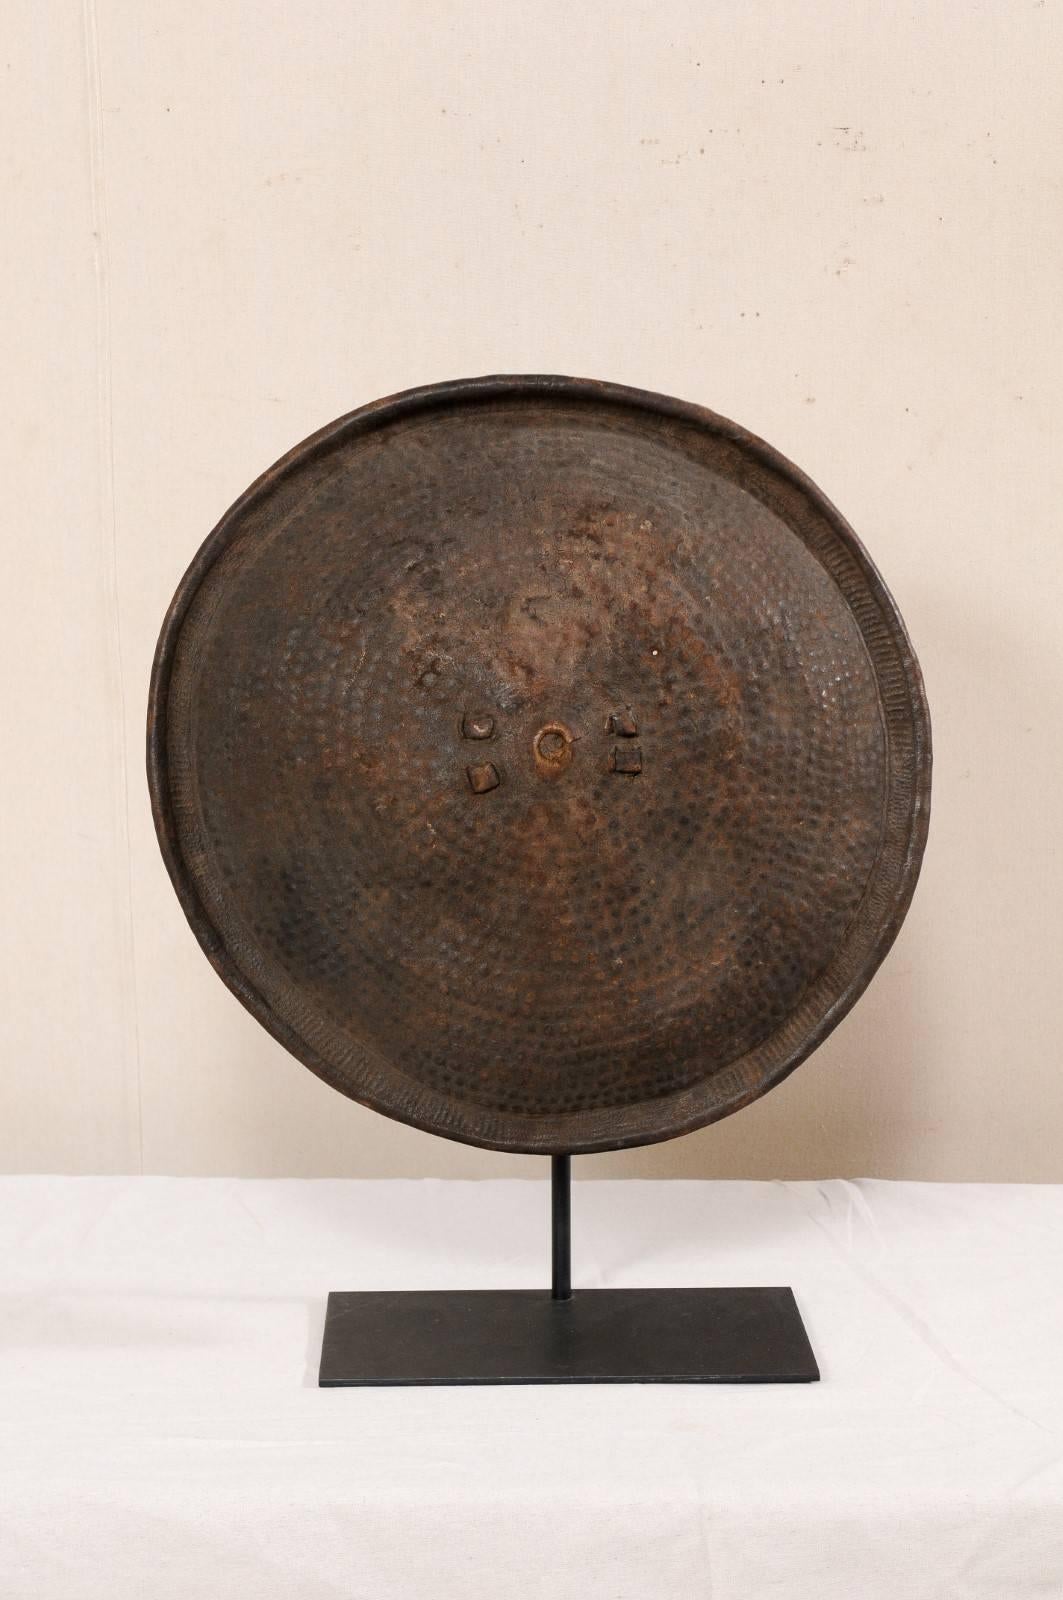 An Ethiopian tribal shield on custom iron stand. This vintage shield, originating from Ethiopia, has an overall convexly rounded-shape, and is made of a rich brown animal hide with wonderful patina. The leather shield is decorated with tooled